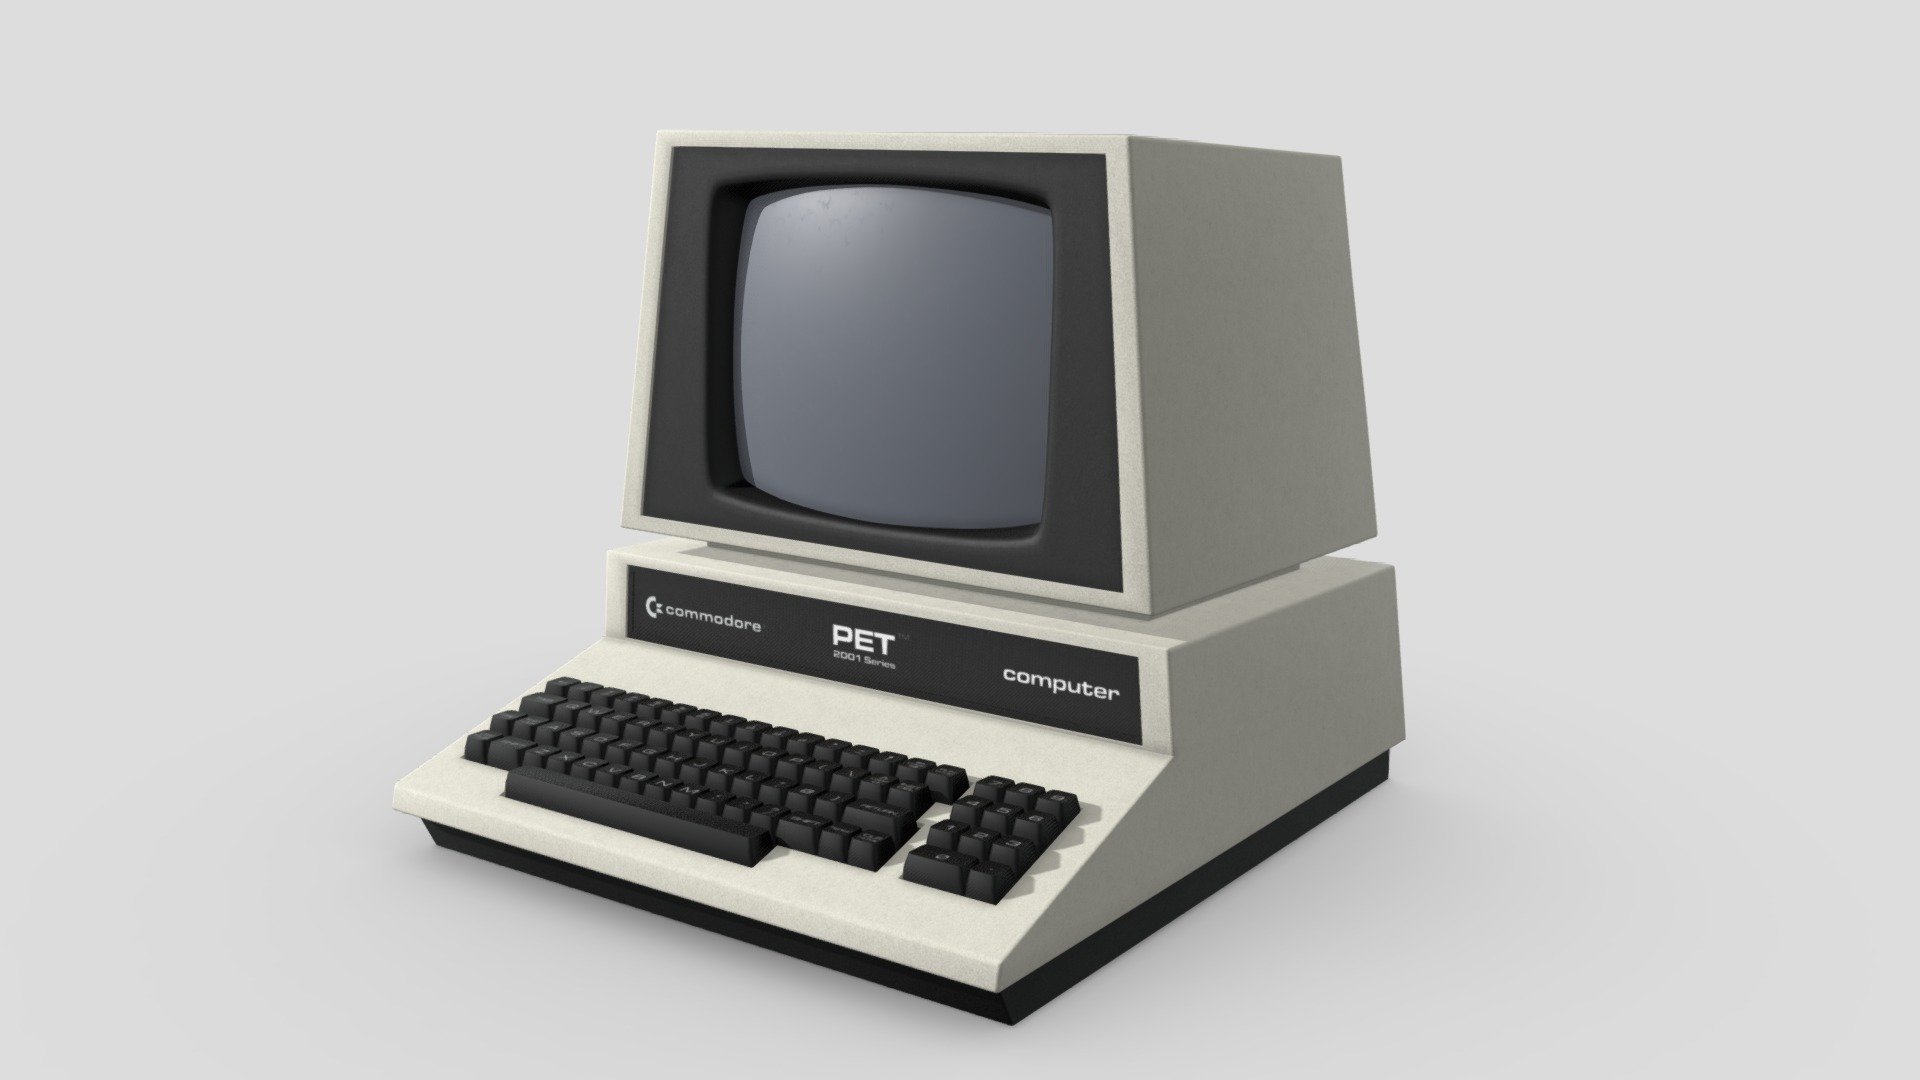 A high-poly model of a Commodore PET home computer from the 1980s. Modelled in Blender and textured using Quixel Mixer. All materials have been baked into albedo/roughness/metallic/oppacity maps. The texture resolution is 4k 3d model